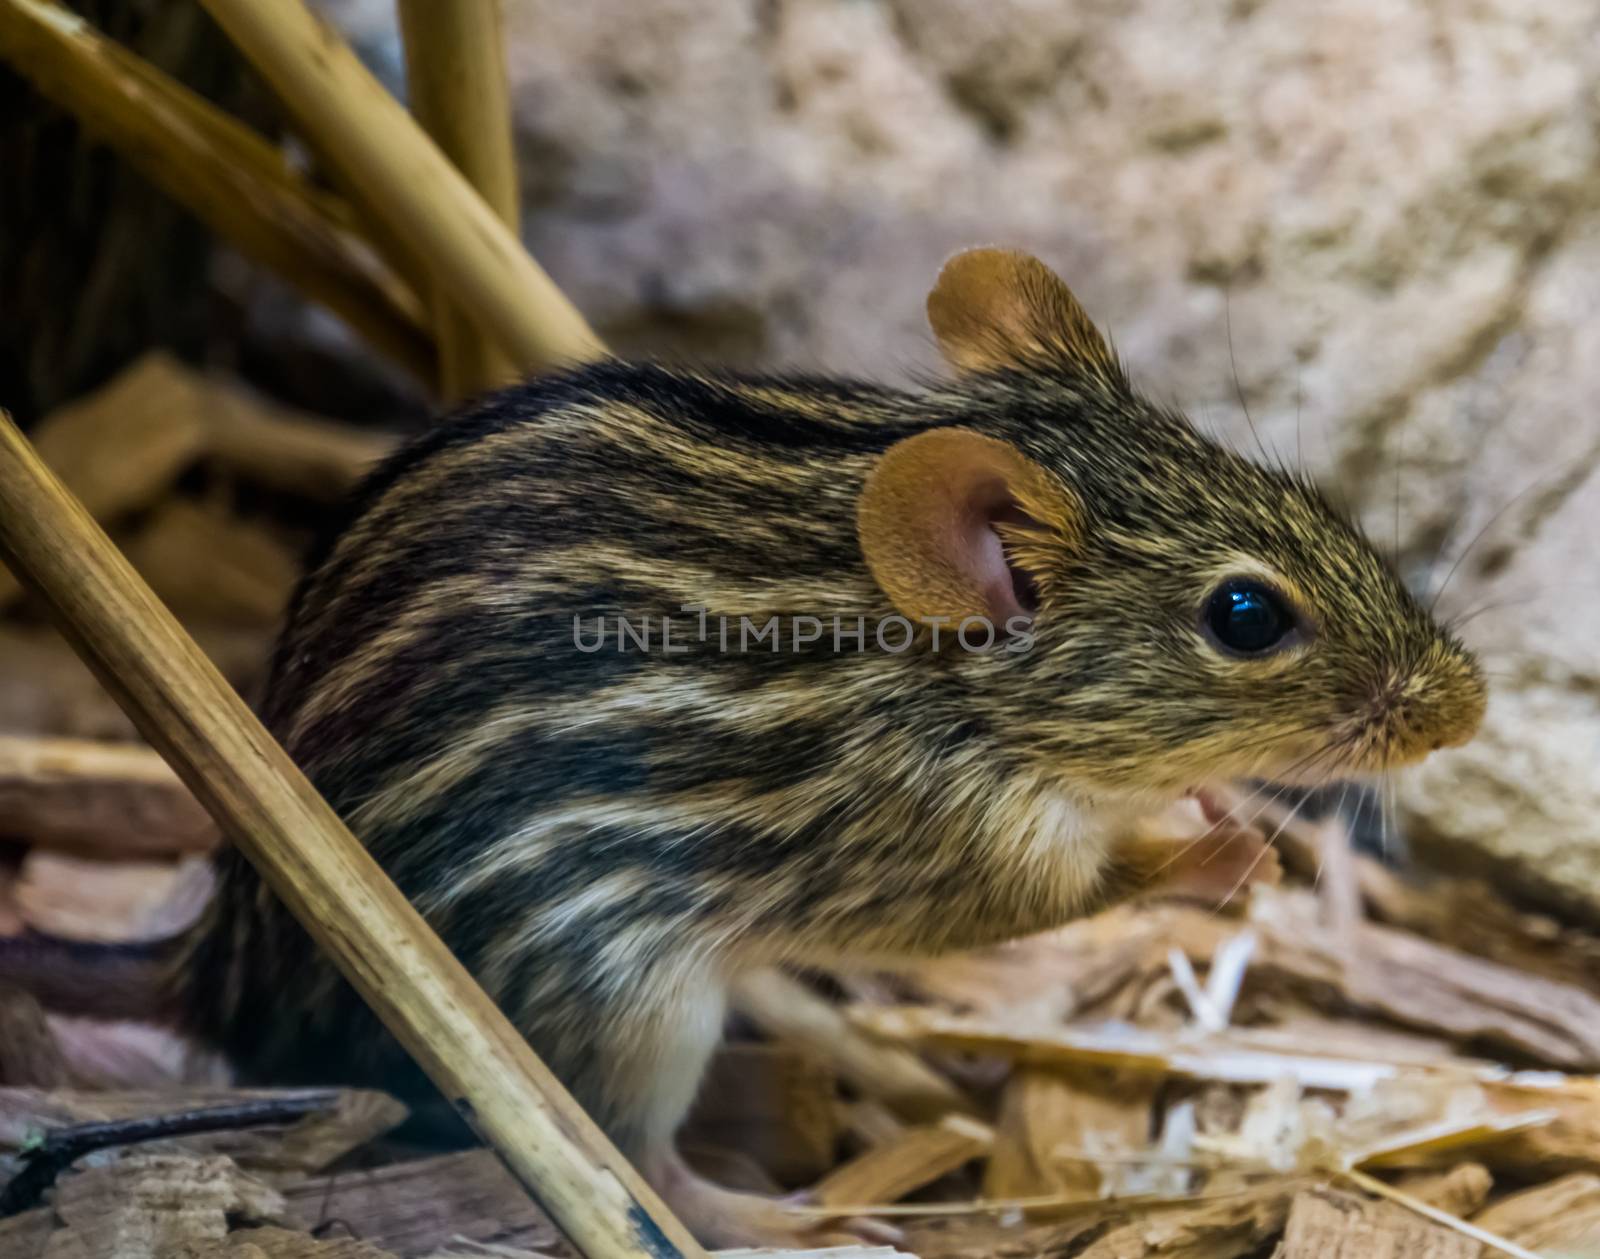 closeup portrait of a barbary striped grass mouse, popular tropical rodent from Africa, small cute pets by charlottebleijenberg